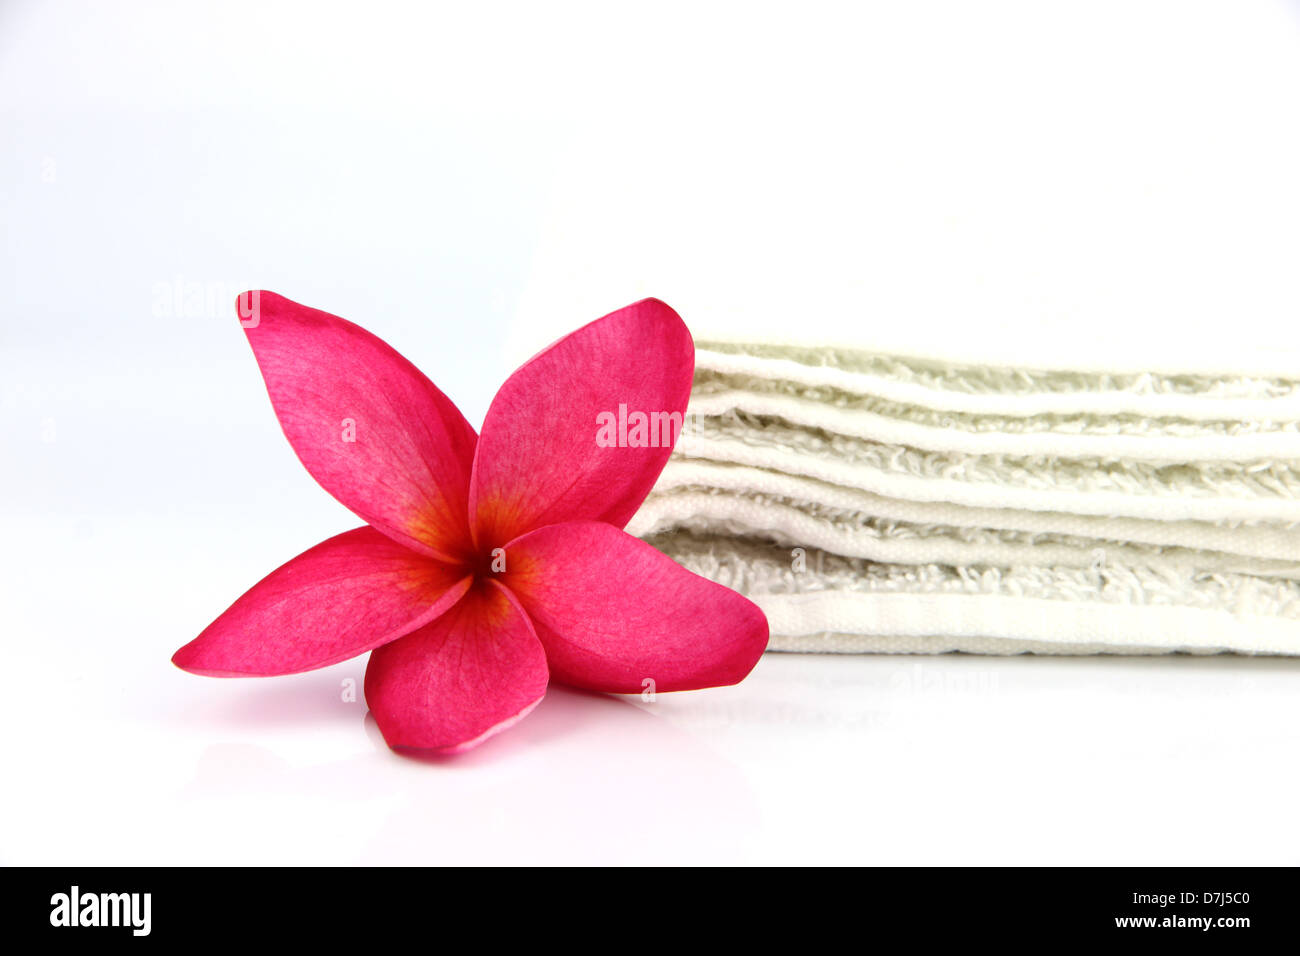 Red flowers with white towel on white background. Stock Photo